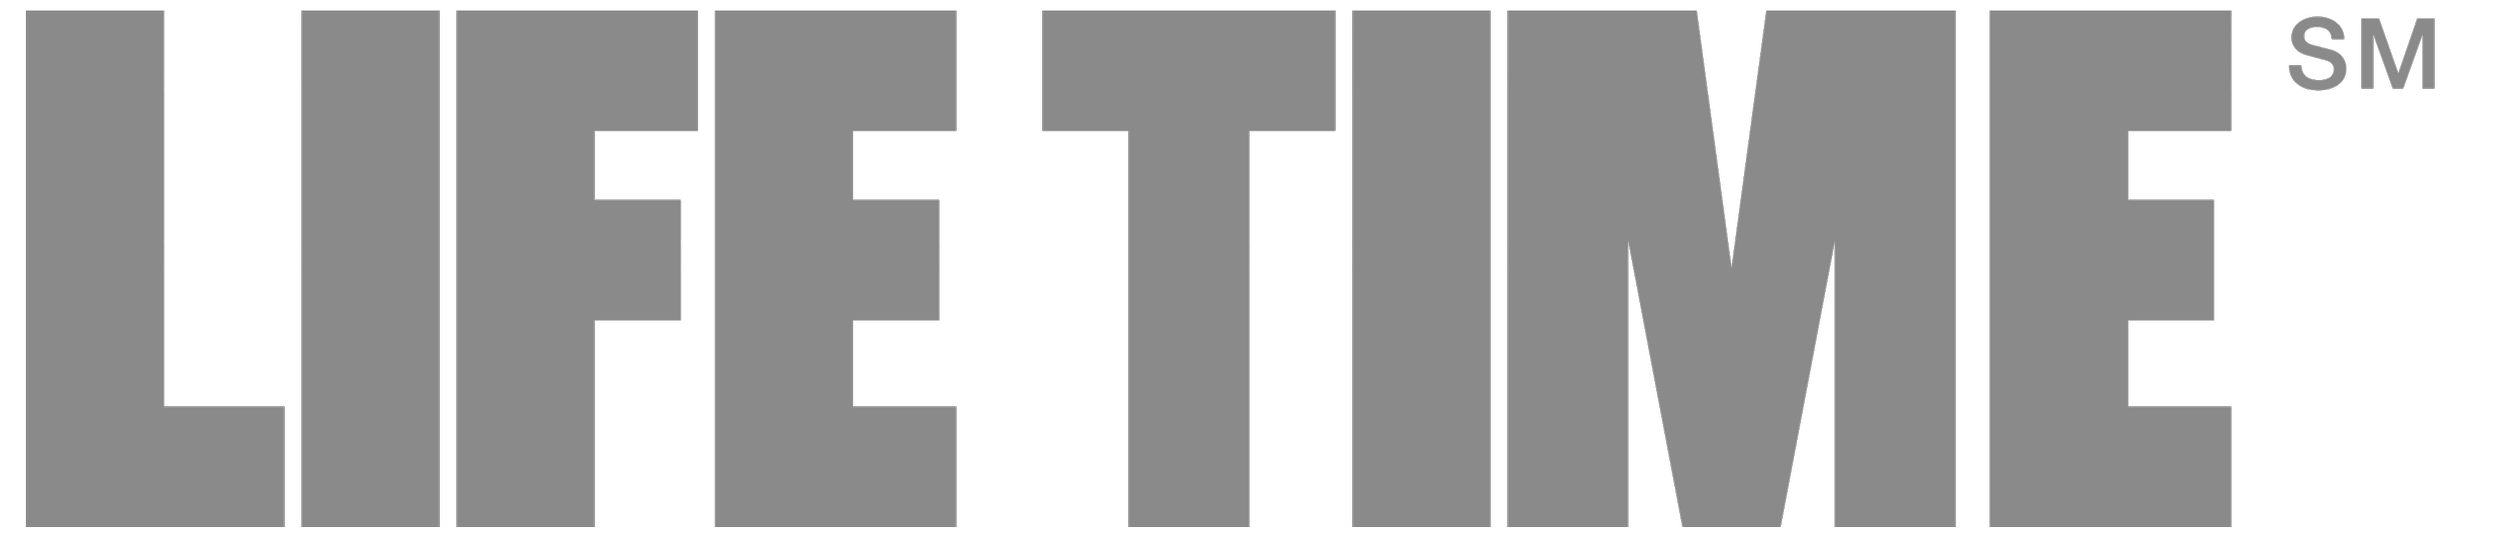 Life_Time_Fitness_logo_logotype.png